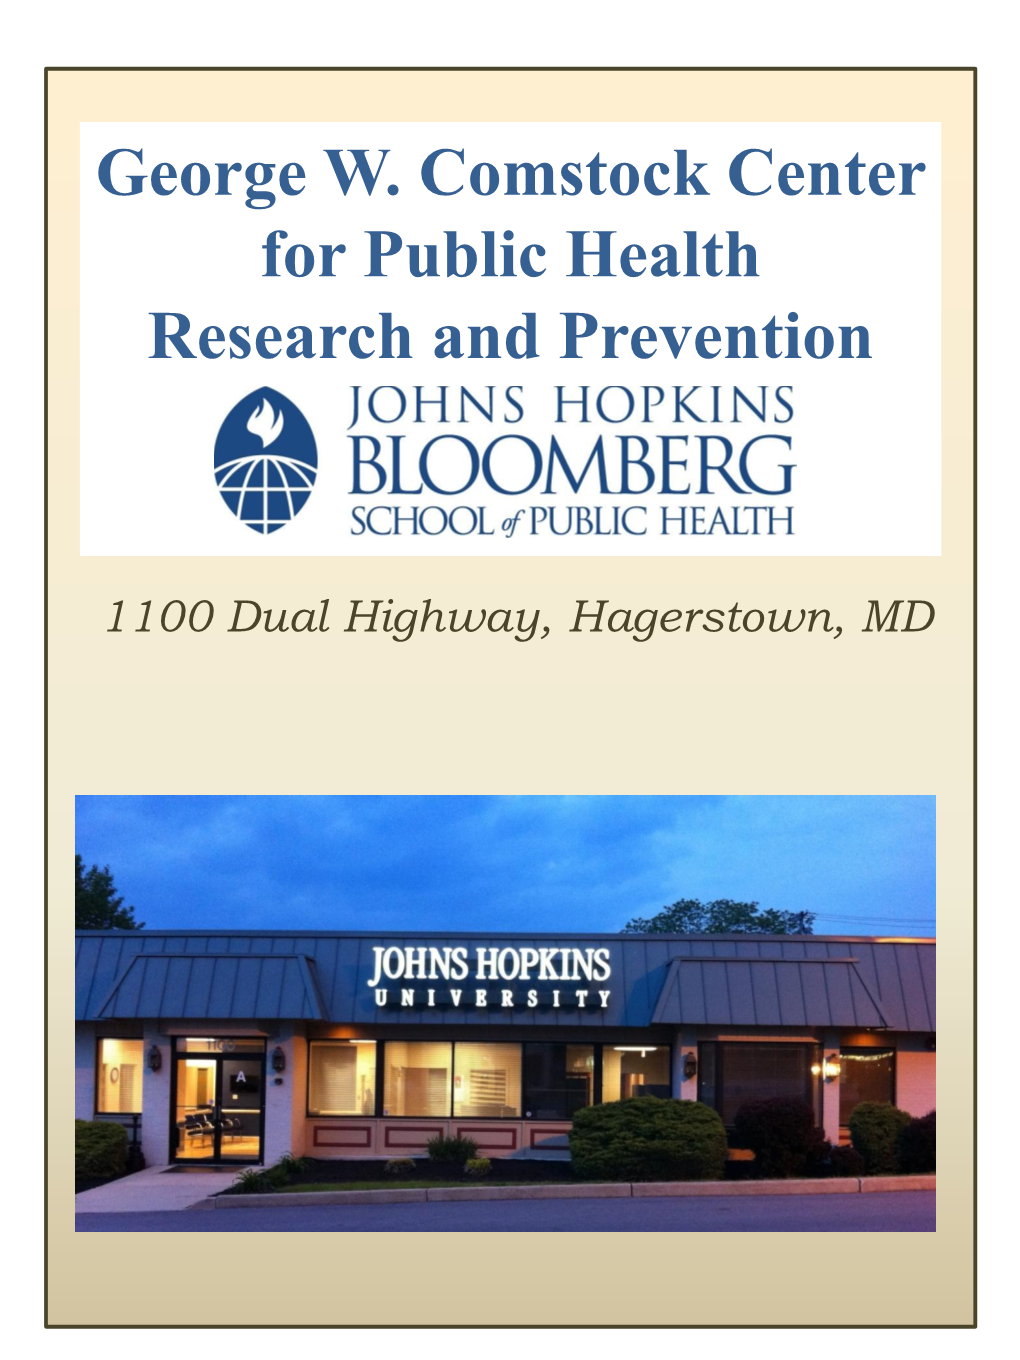 George W. Comstock Center for Public Health Research and Prevention